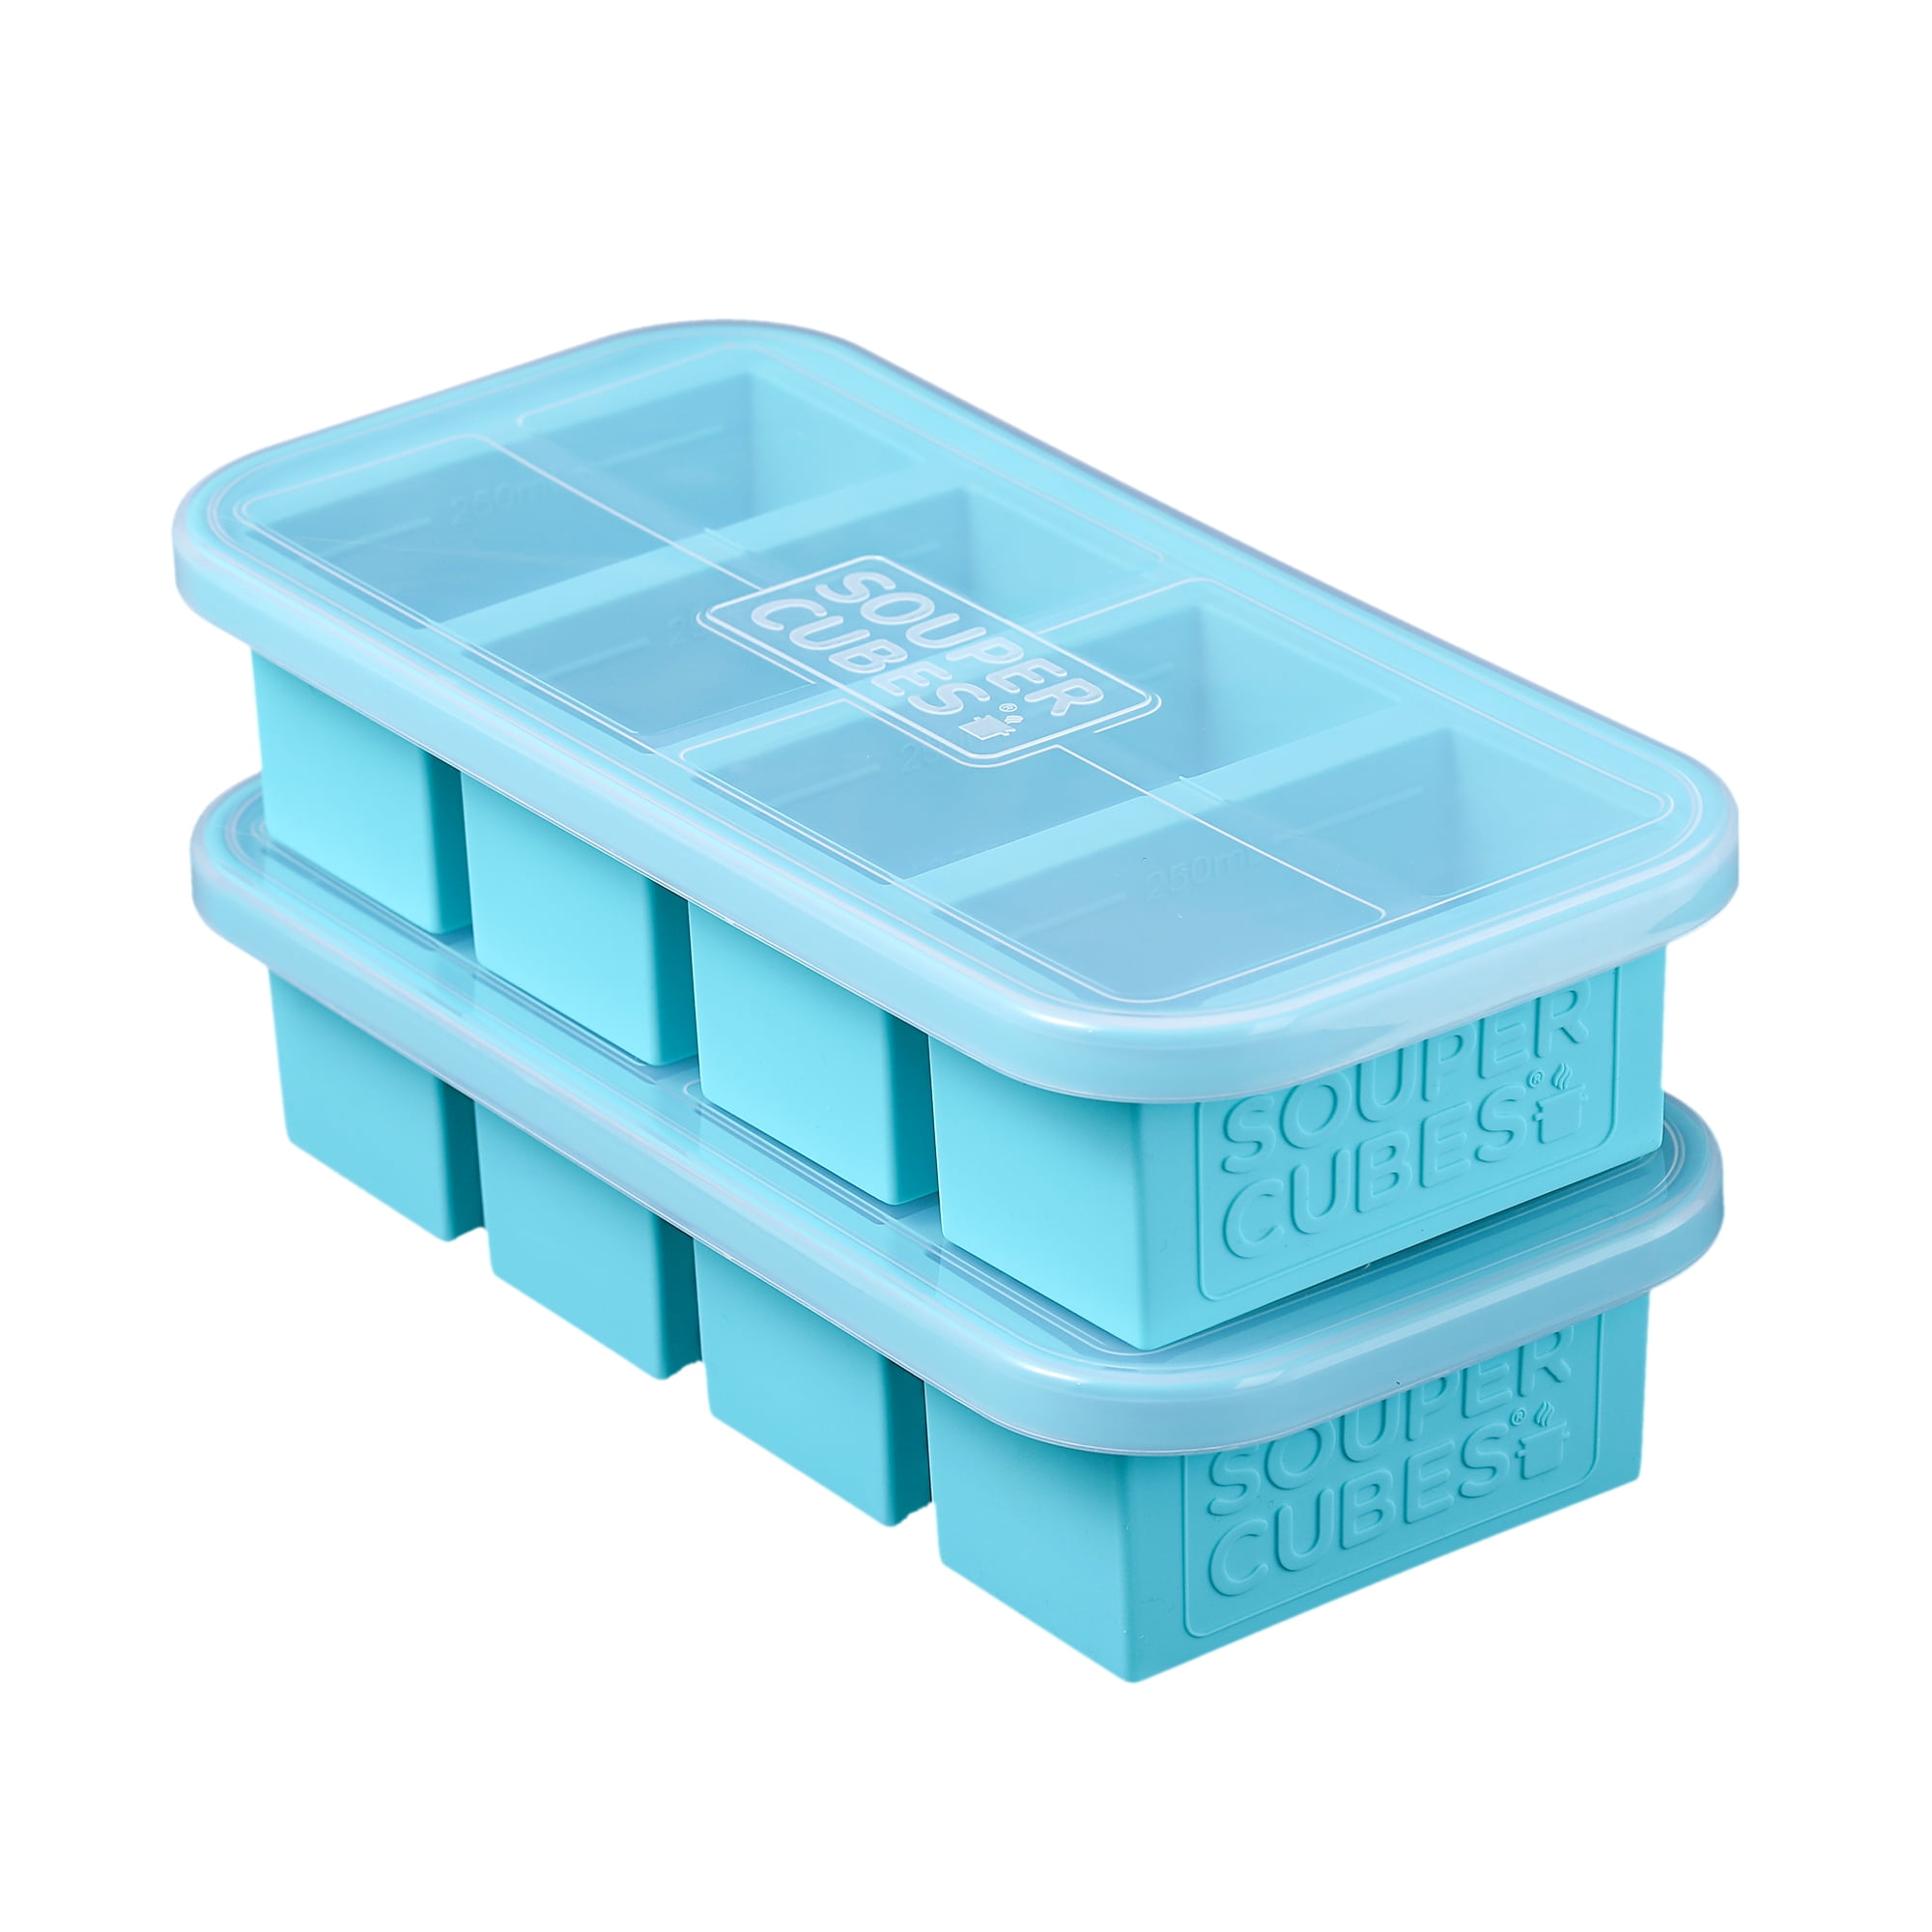 Freeze Soup Sprinkles Edition Souper Cubes 1-Cup Freezing Tray with lid Chili stew Makes 8 Perfect 1 Cup portions Pack of 2 